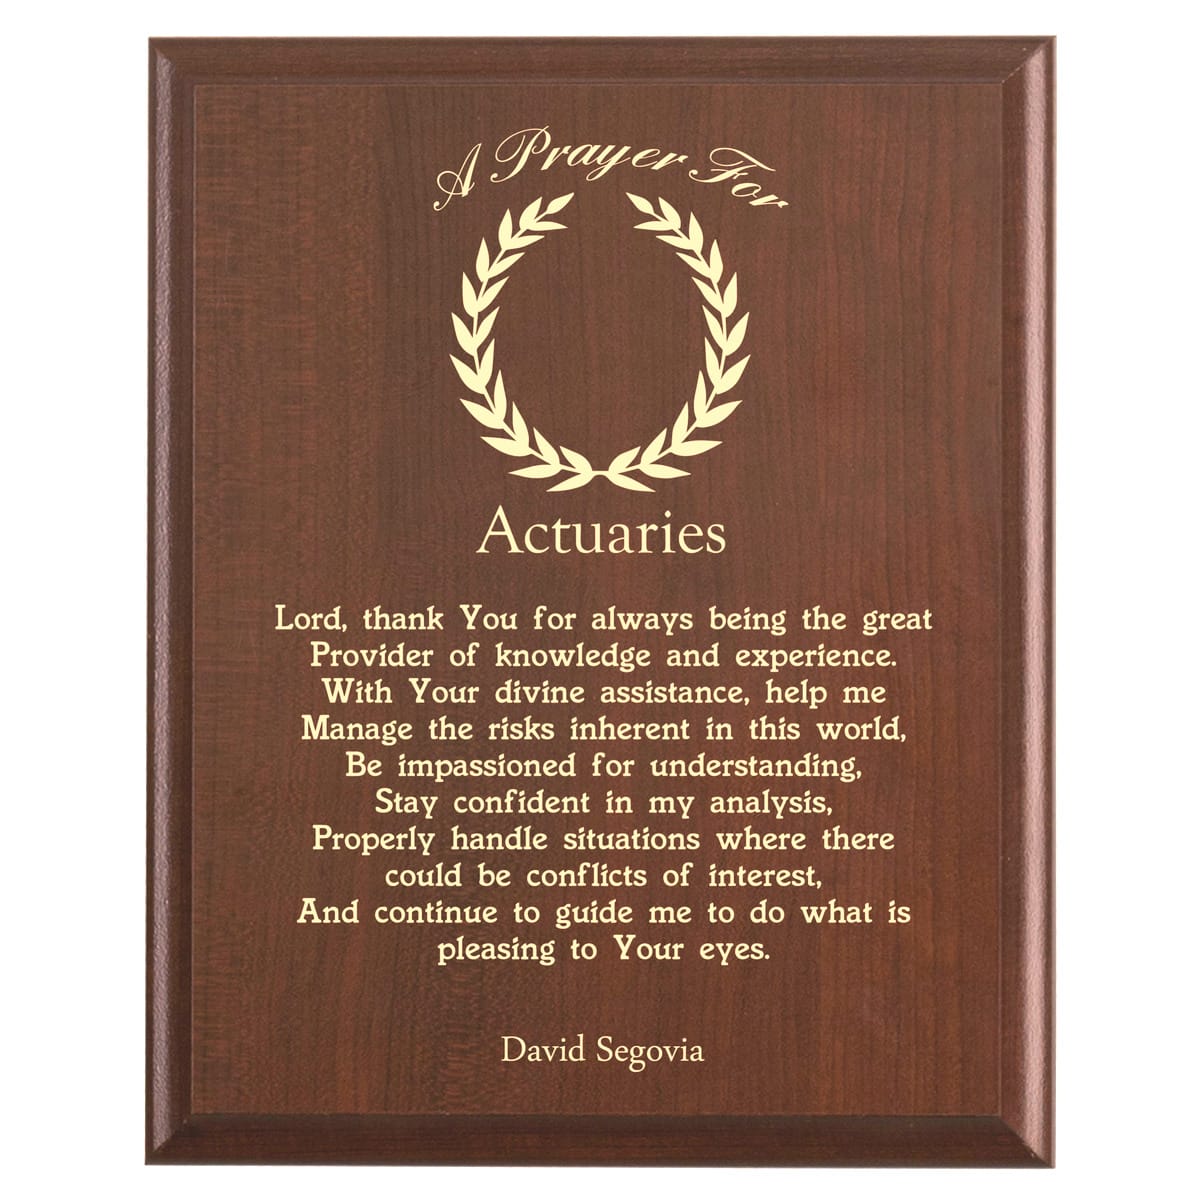 Plaque photo: Actuary Prayer Plaque design with free personalization. Wood style finish with customized text.